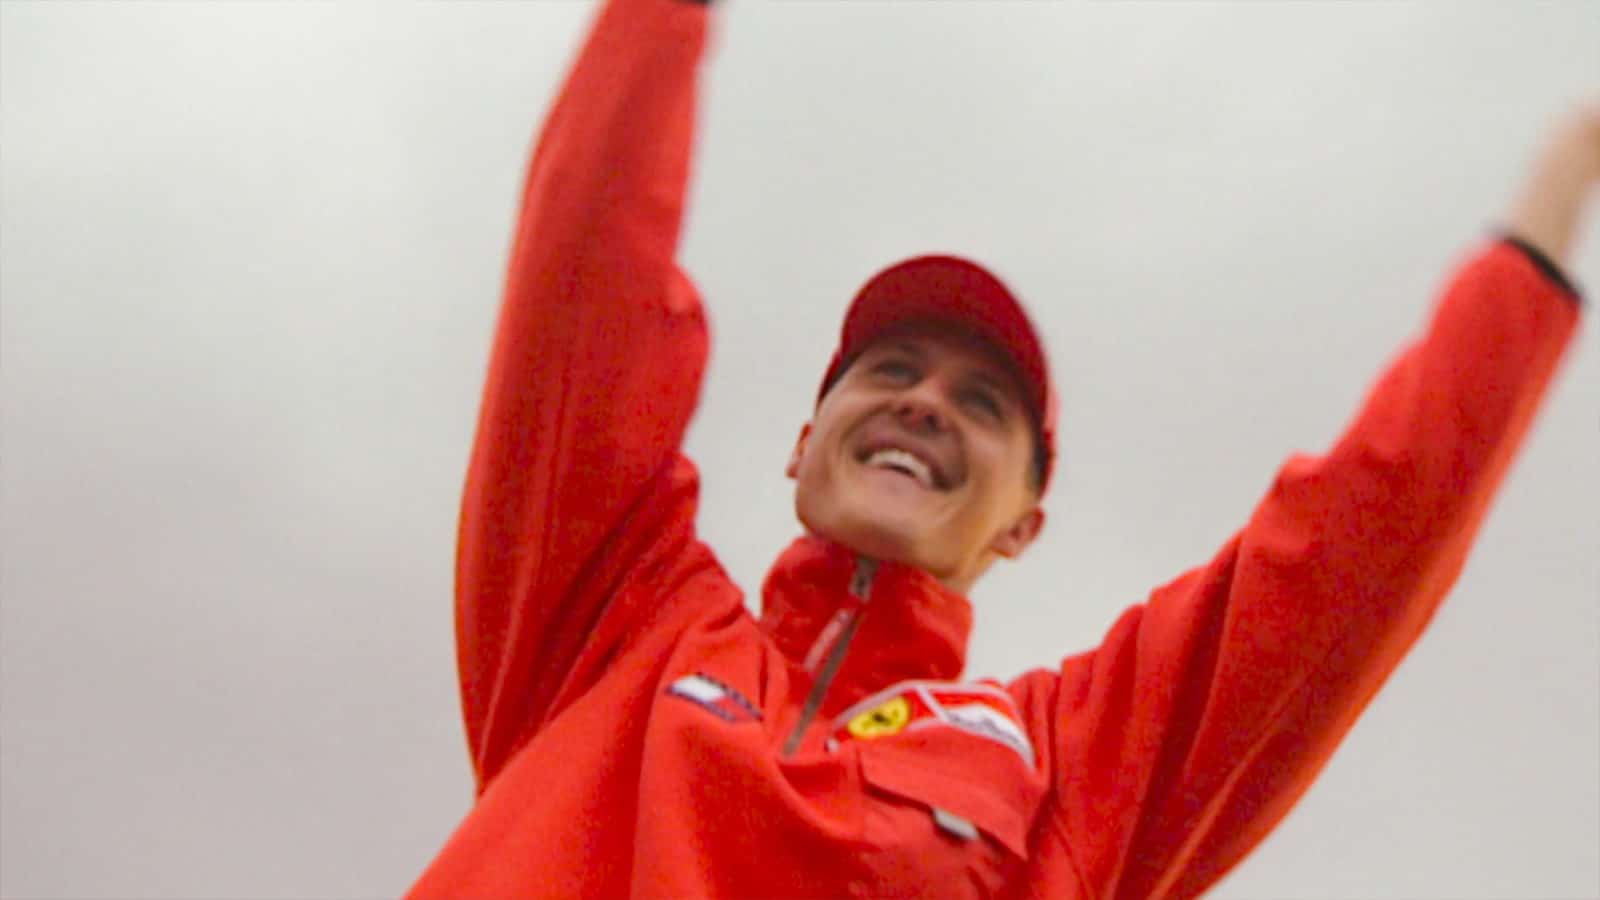 Michael Schumacher with hands in the air